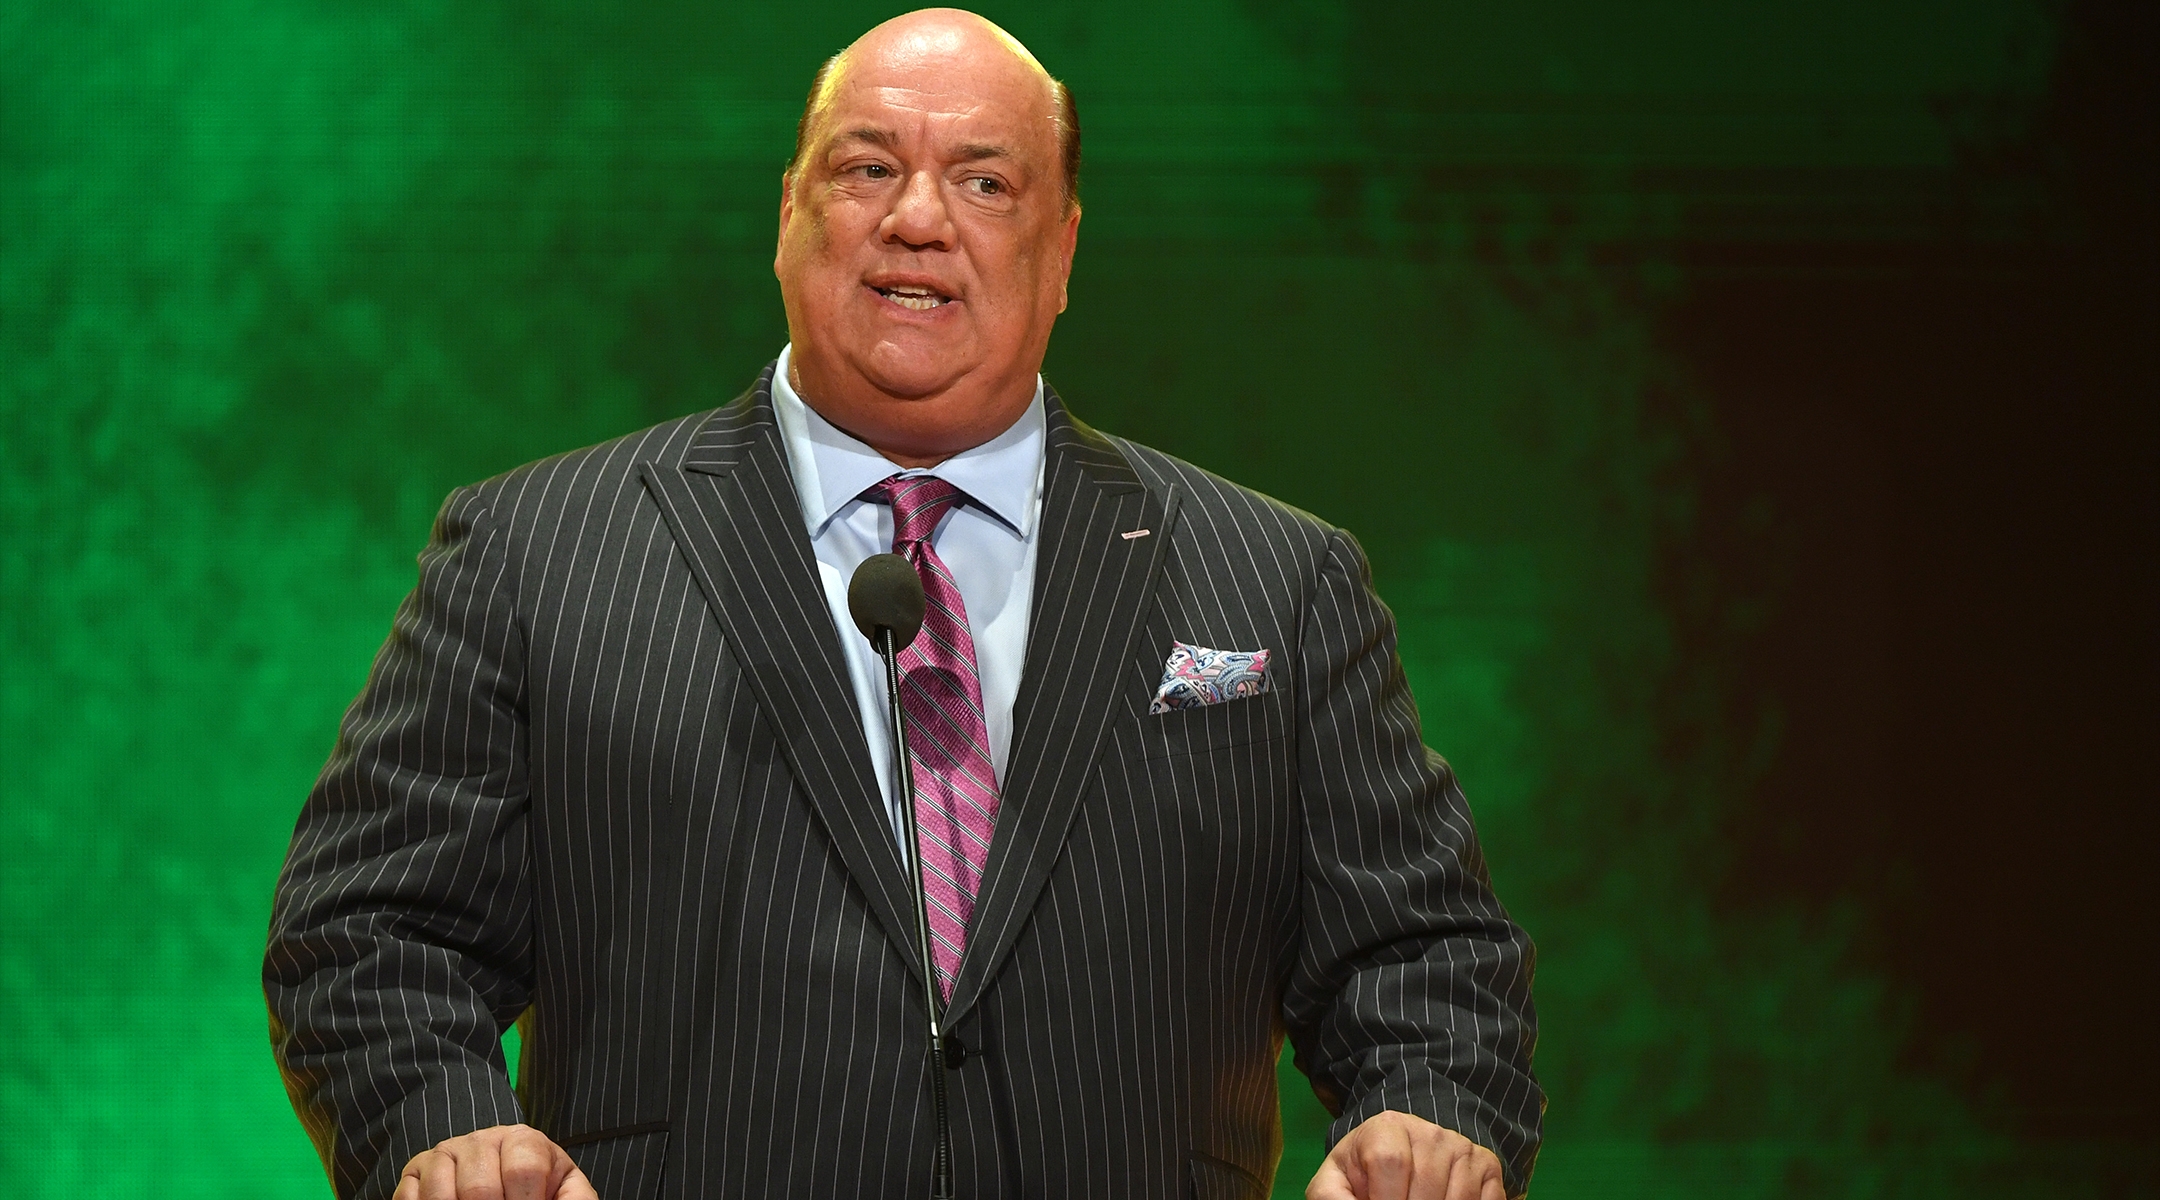 Professional wrestler advocate Paul Heyman speaks at a WWE news conference, Oct. 11, 2019, in Las Vegas. (Ethan Miller/Getty Images)